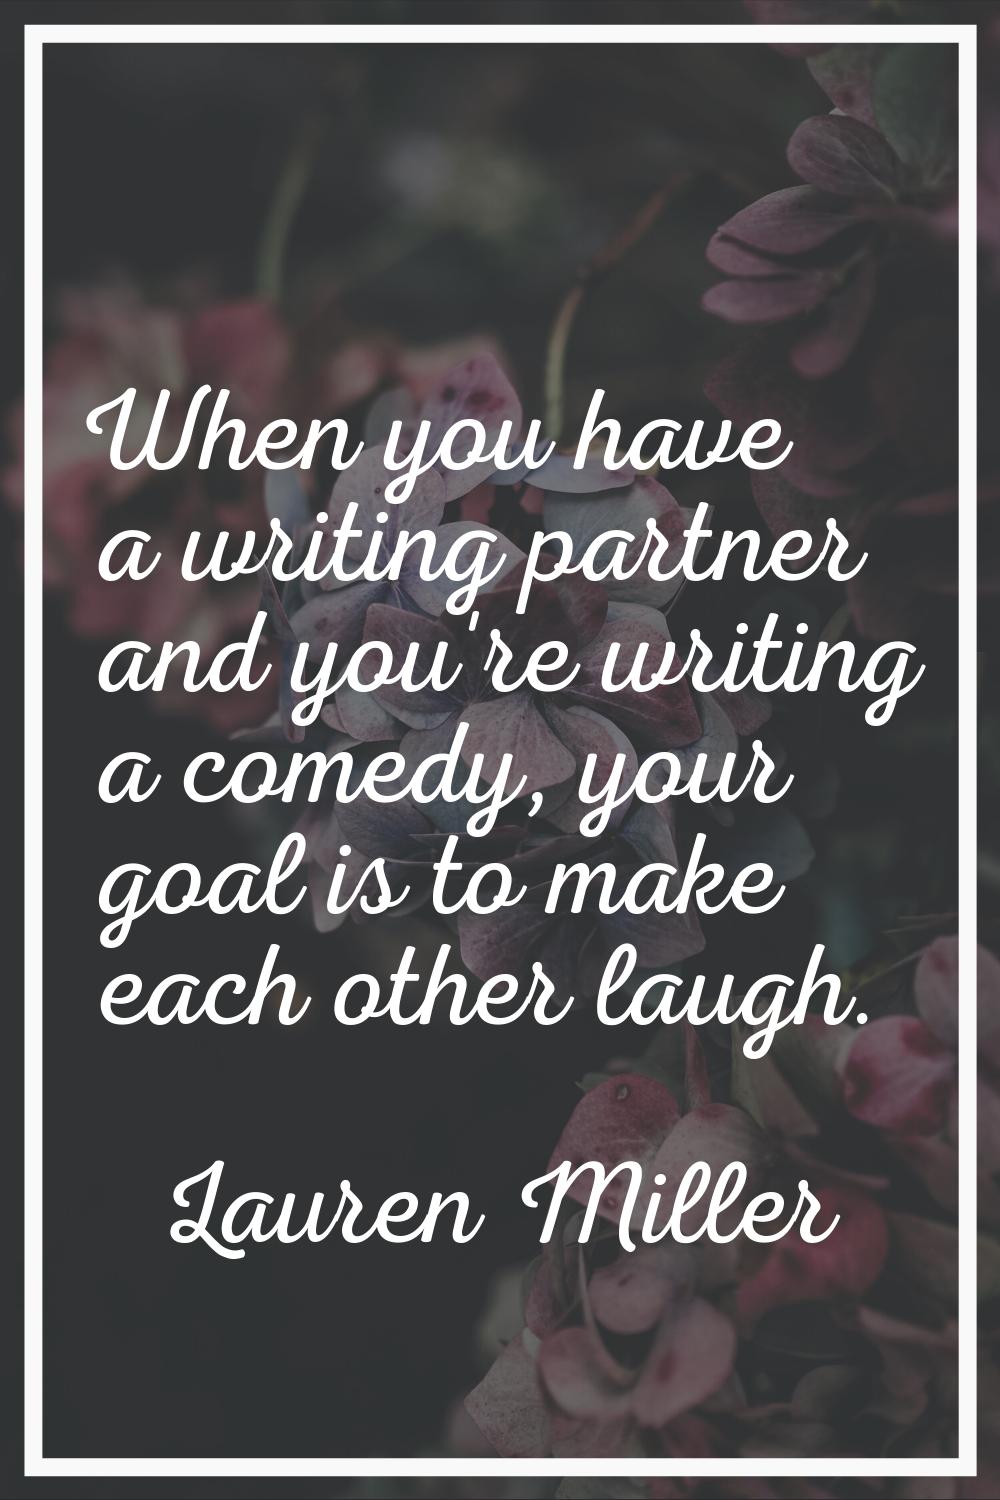 When you have a writing partner and you're writing a comedy, your goal is to make each other laugh.